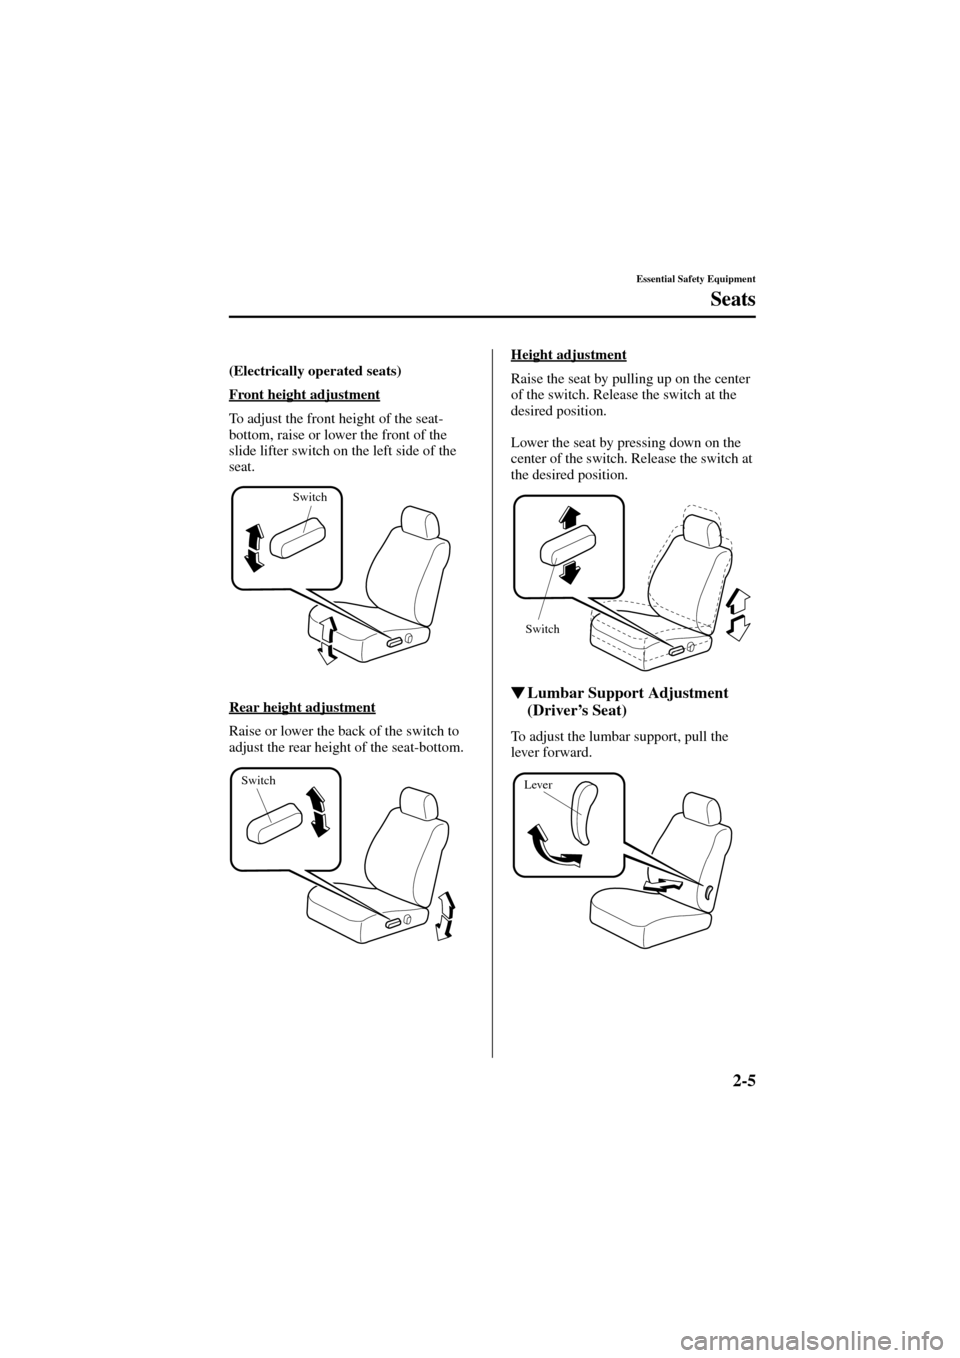 MAZDA MODEL 6 2004   (in English) Owners Manual 2-5
Essential Safety Equipment
Seats
Form No. 8R29-EA-02I
(Electrically operated seats)
 
Front height adjustment
To adjust the front height of the seat-
bottom, raise or lower the front of the 
slide